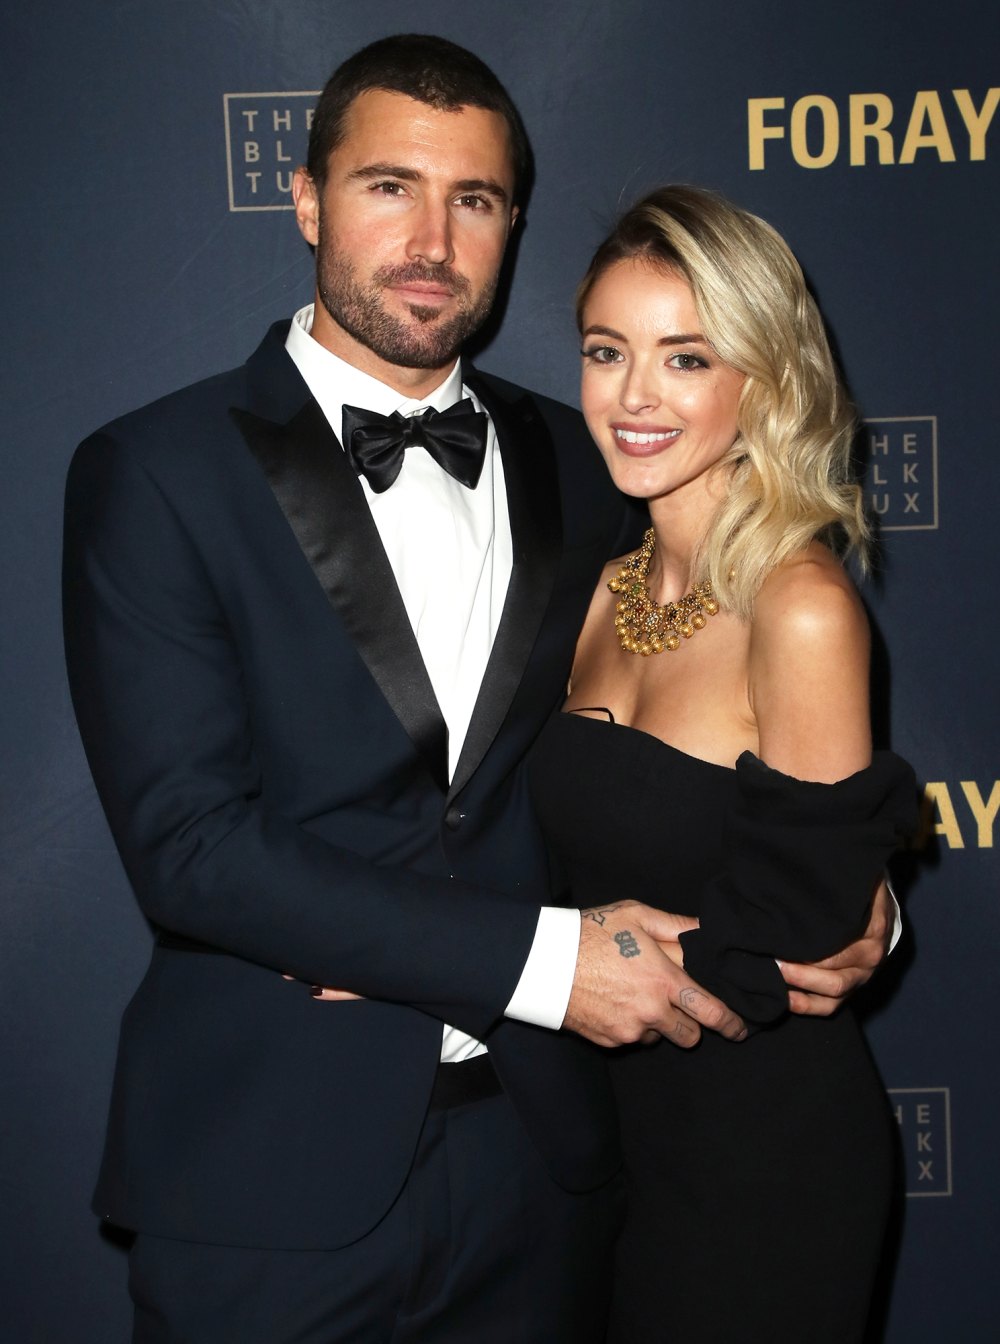 Kaitlynn Carter Says Married Life With Brody Jenner 'Is Great,' Reveals What They Do on Date Night